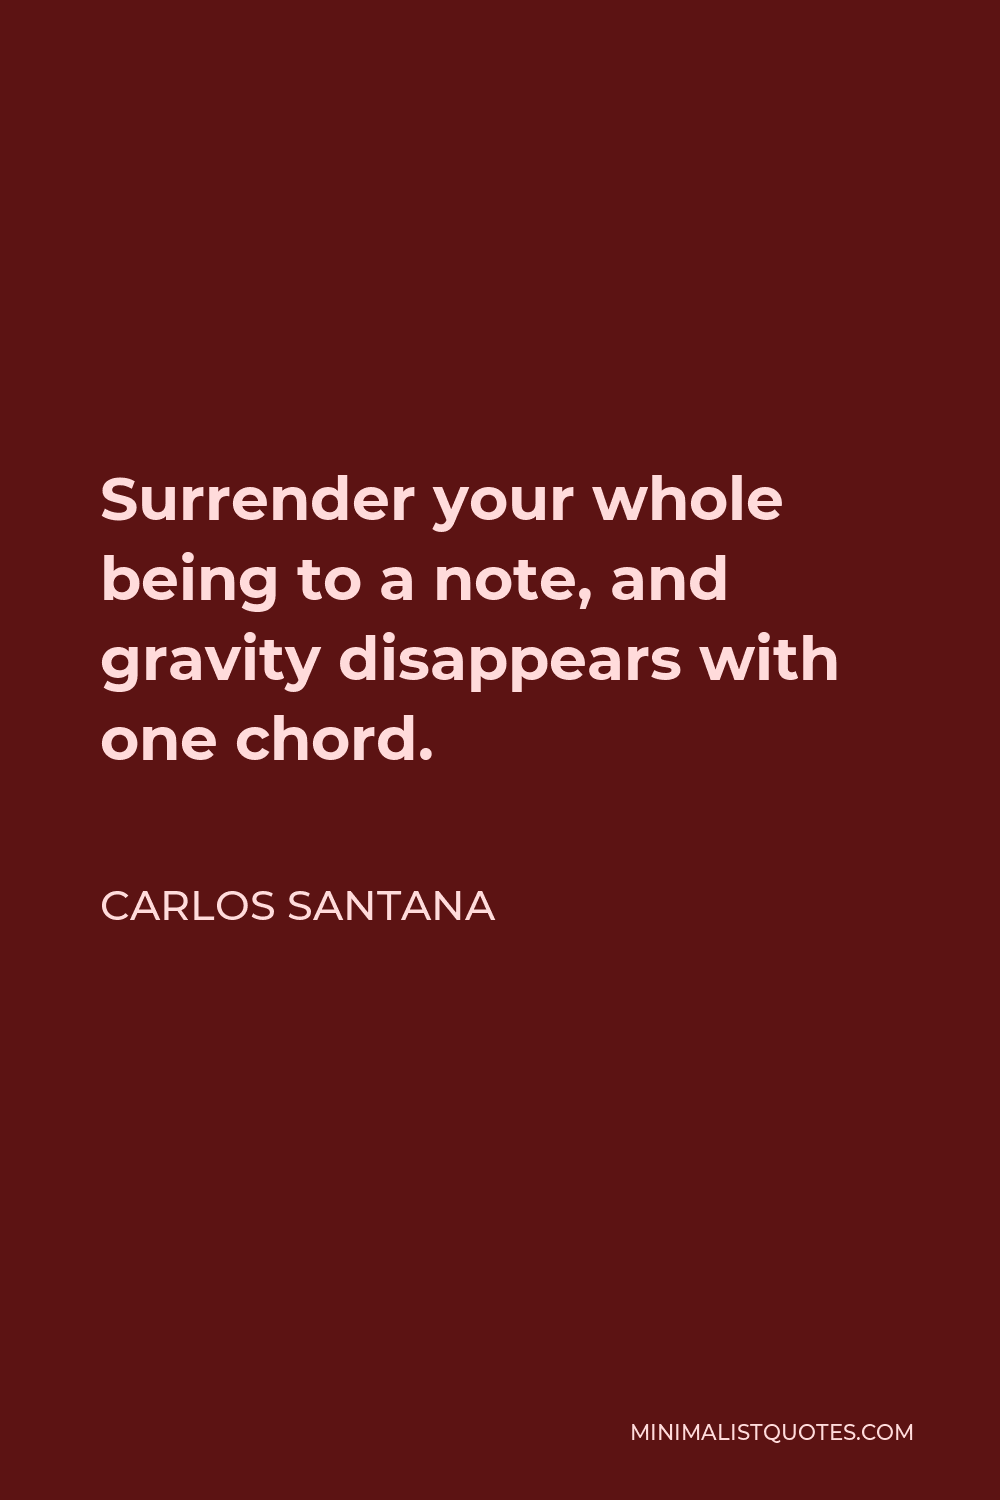 Carlos Santana Quote - Surrender your whole being to a note, and gravity disappears with one chord.